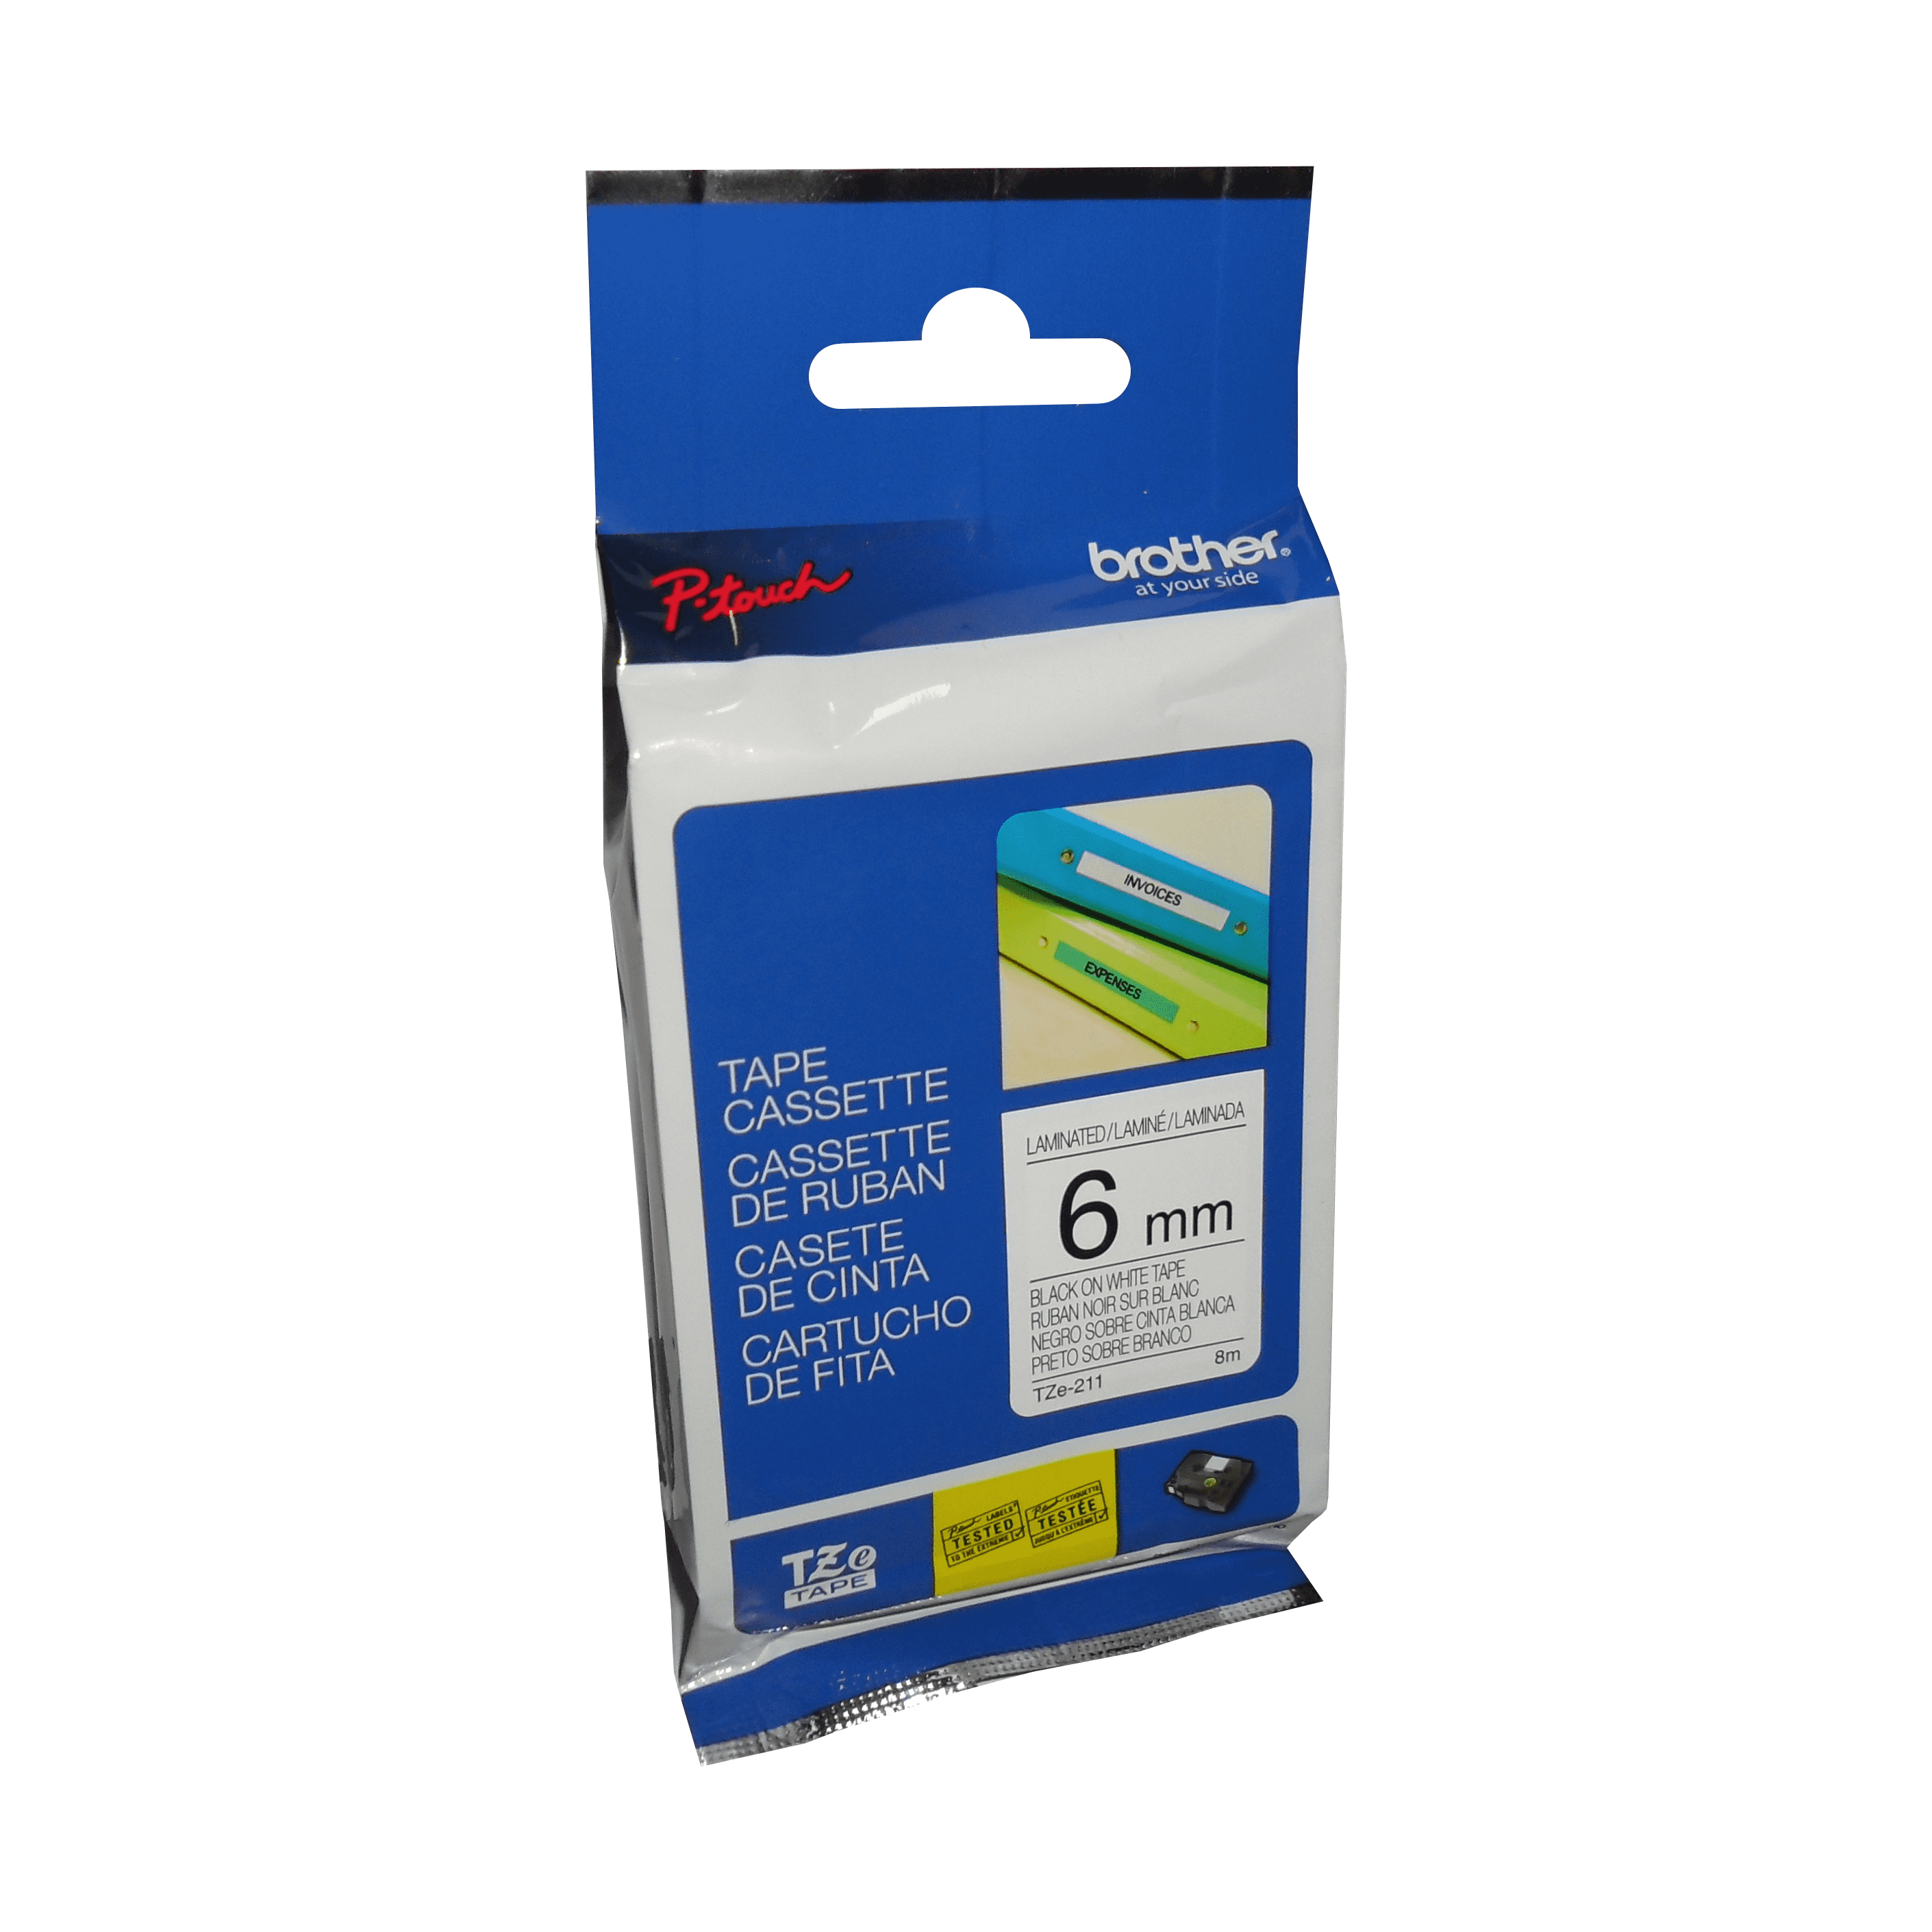 Brother Genuine TZe211 Black on White Laminated Tape for P-touch Label Makers, 6 mm wide x 8 m long - toners.ca